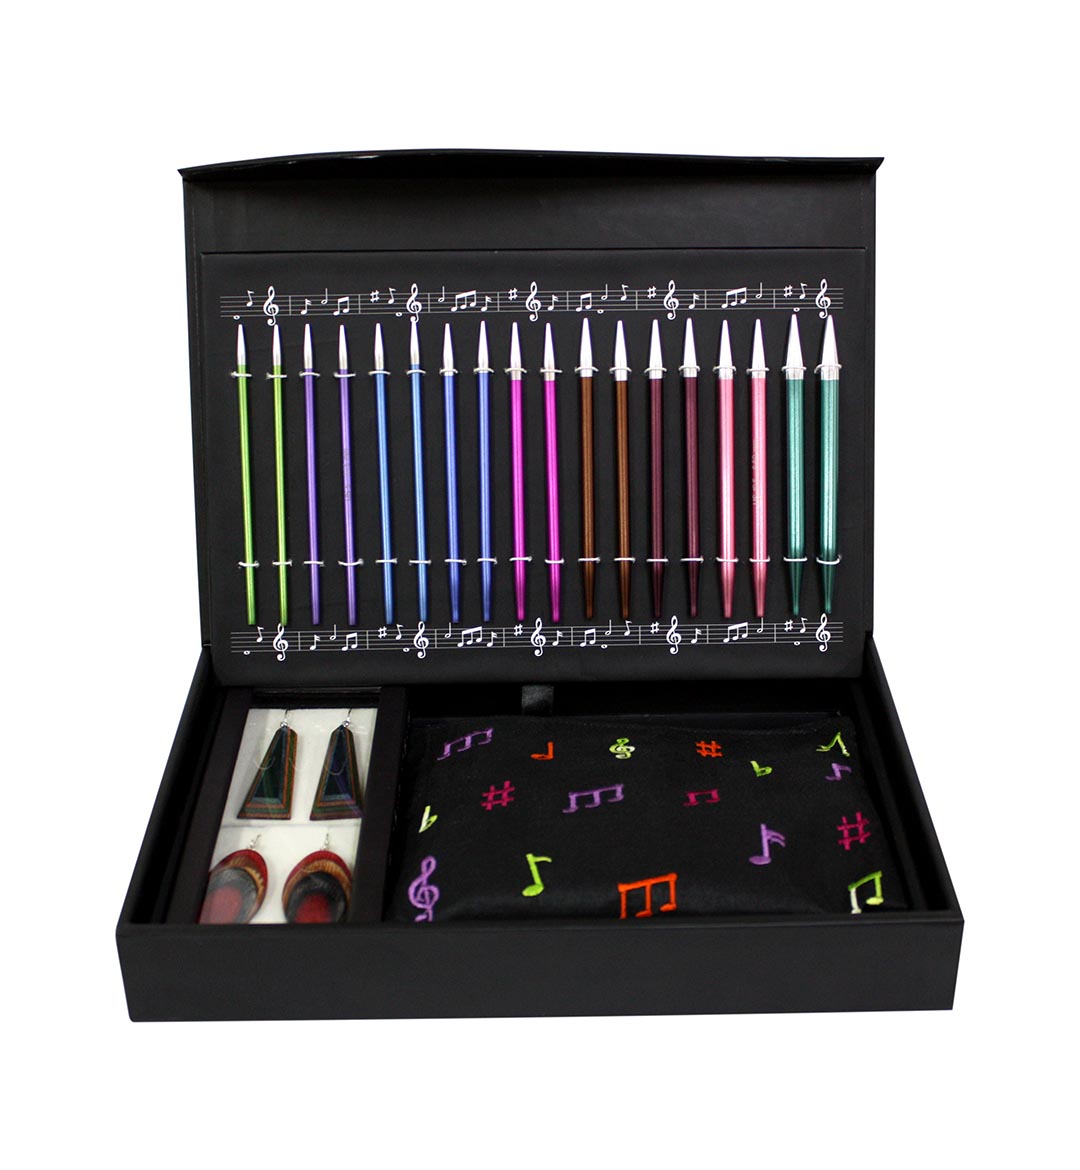 Dreamz 4.5 Interchangeable Deluxe Knitting Needle Set by Knitter's Pride,  Knitting Equipment - Halcyon Yarn